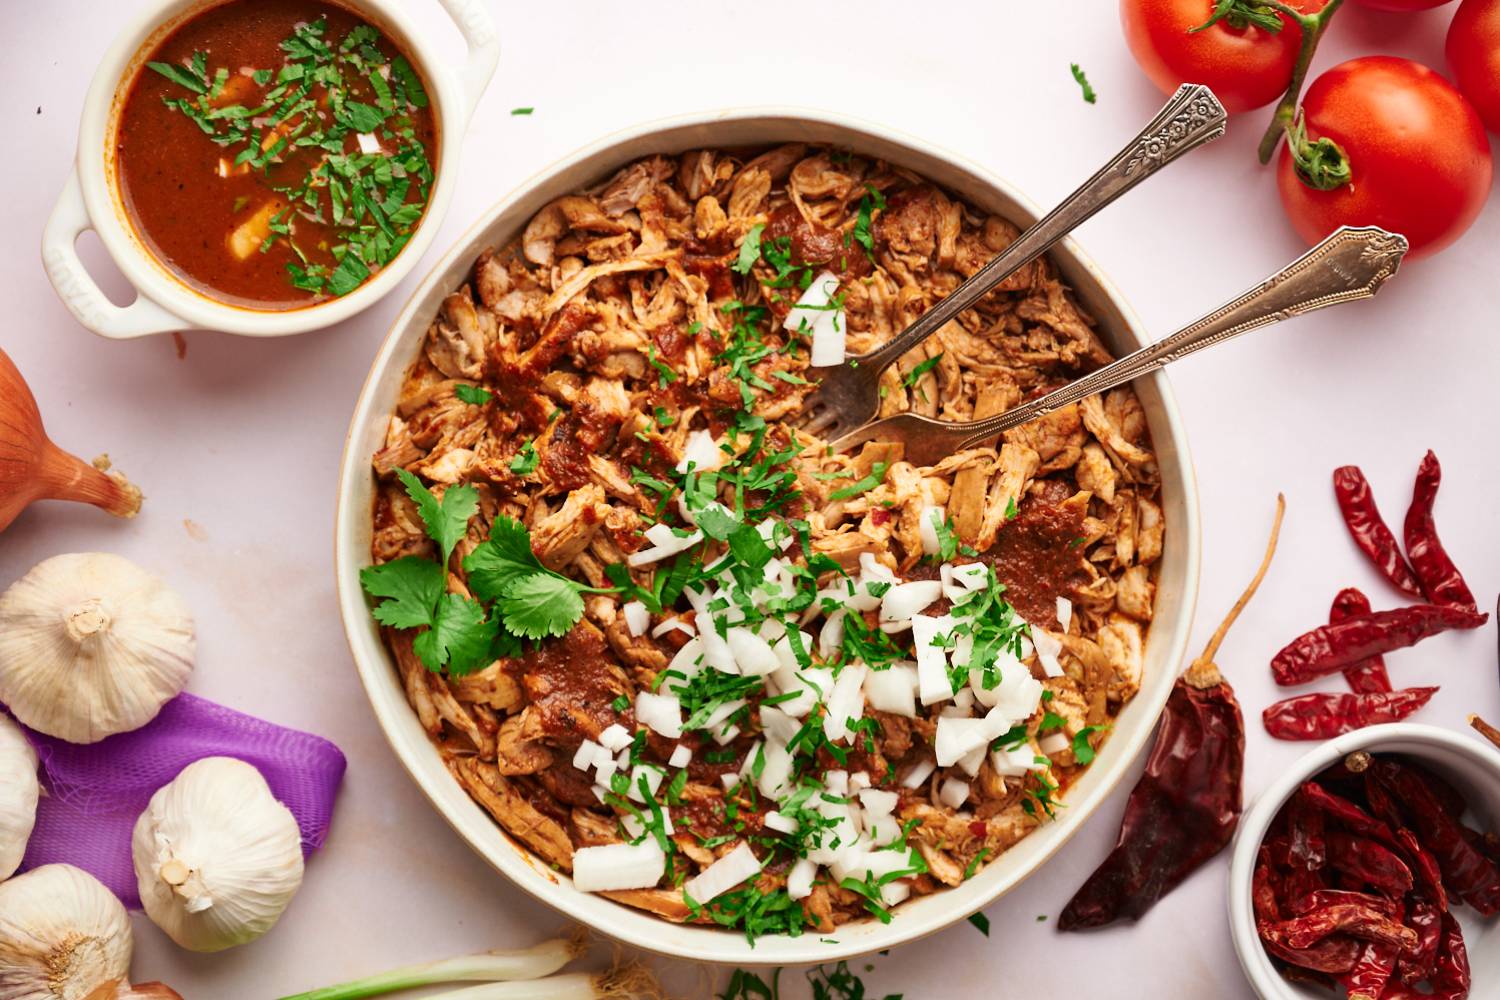 Chicken birria served in a bowl with shredded chicken in a red chile sauce with cilantro and onions.